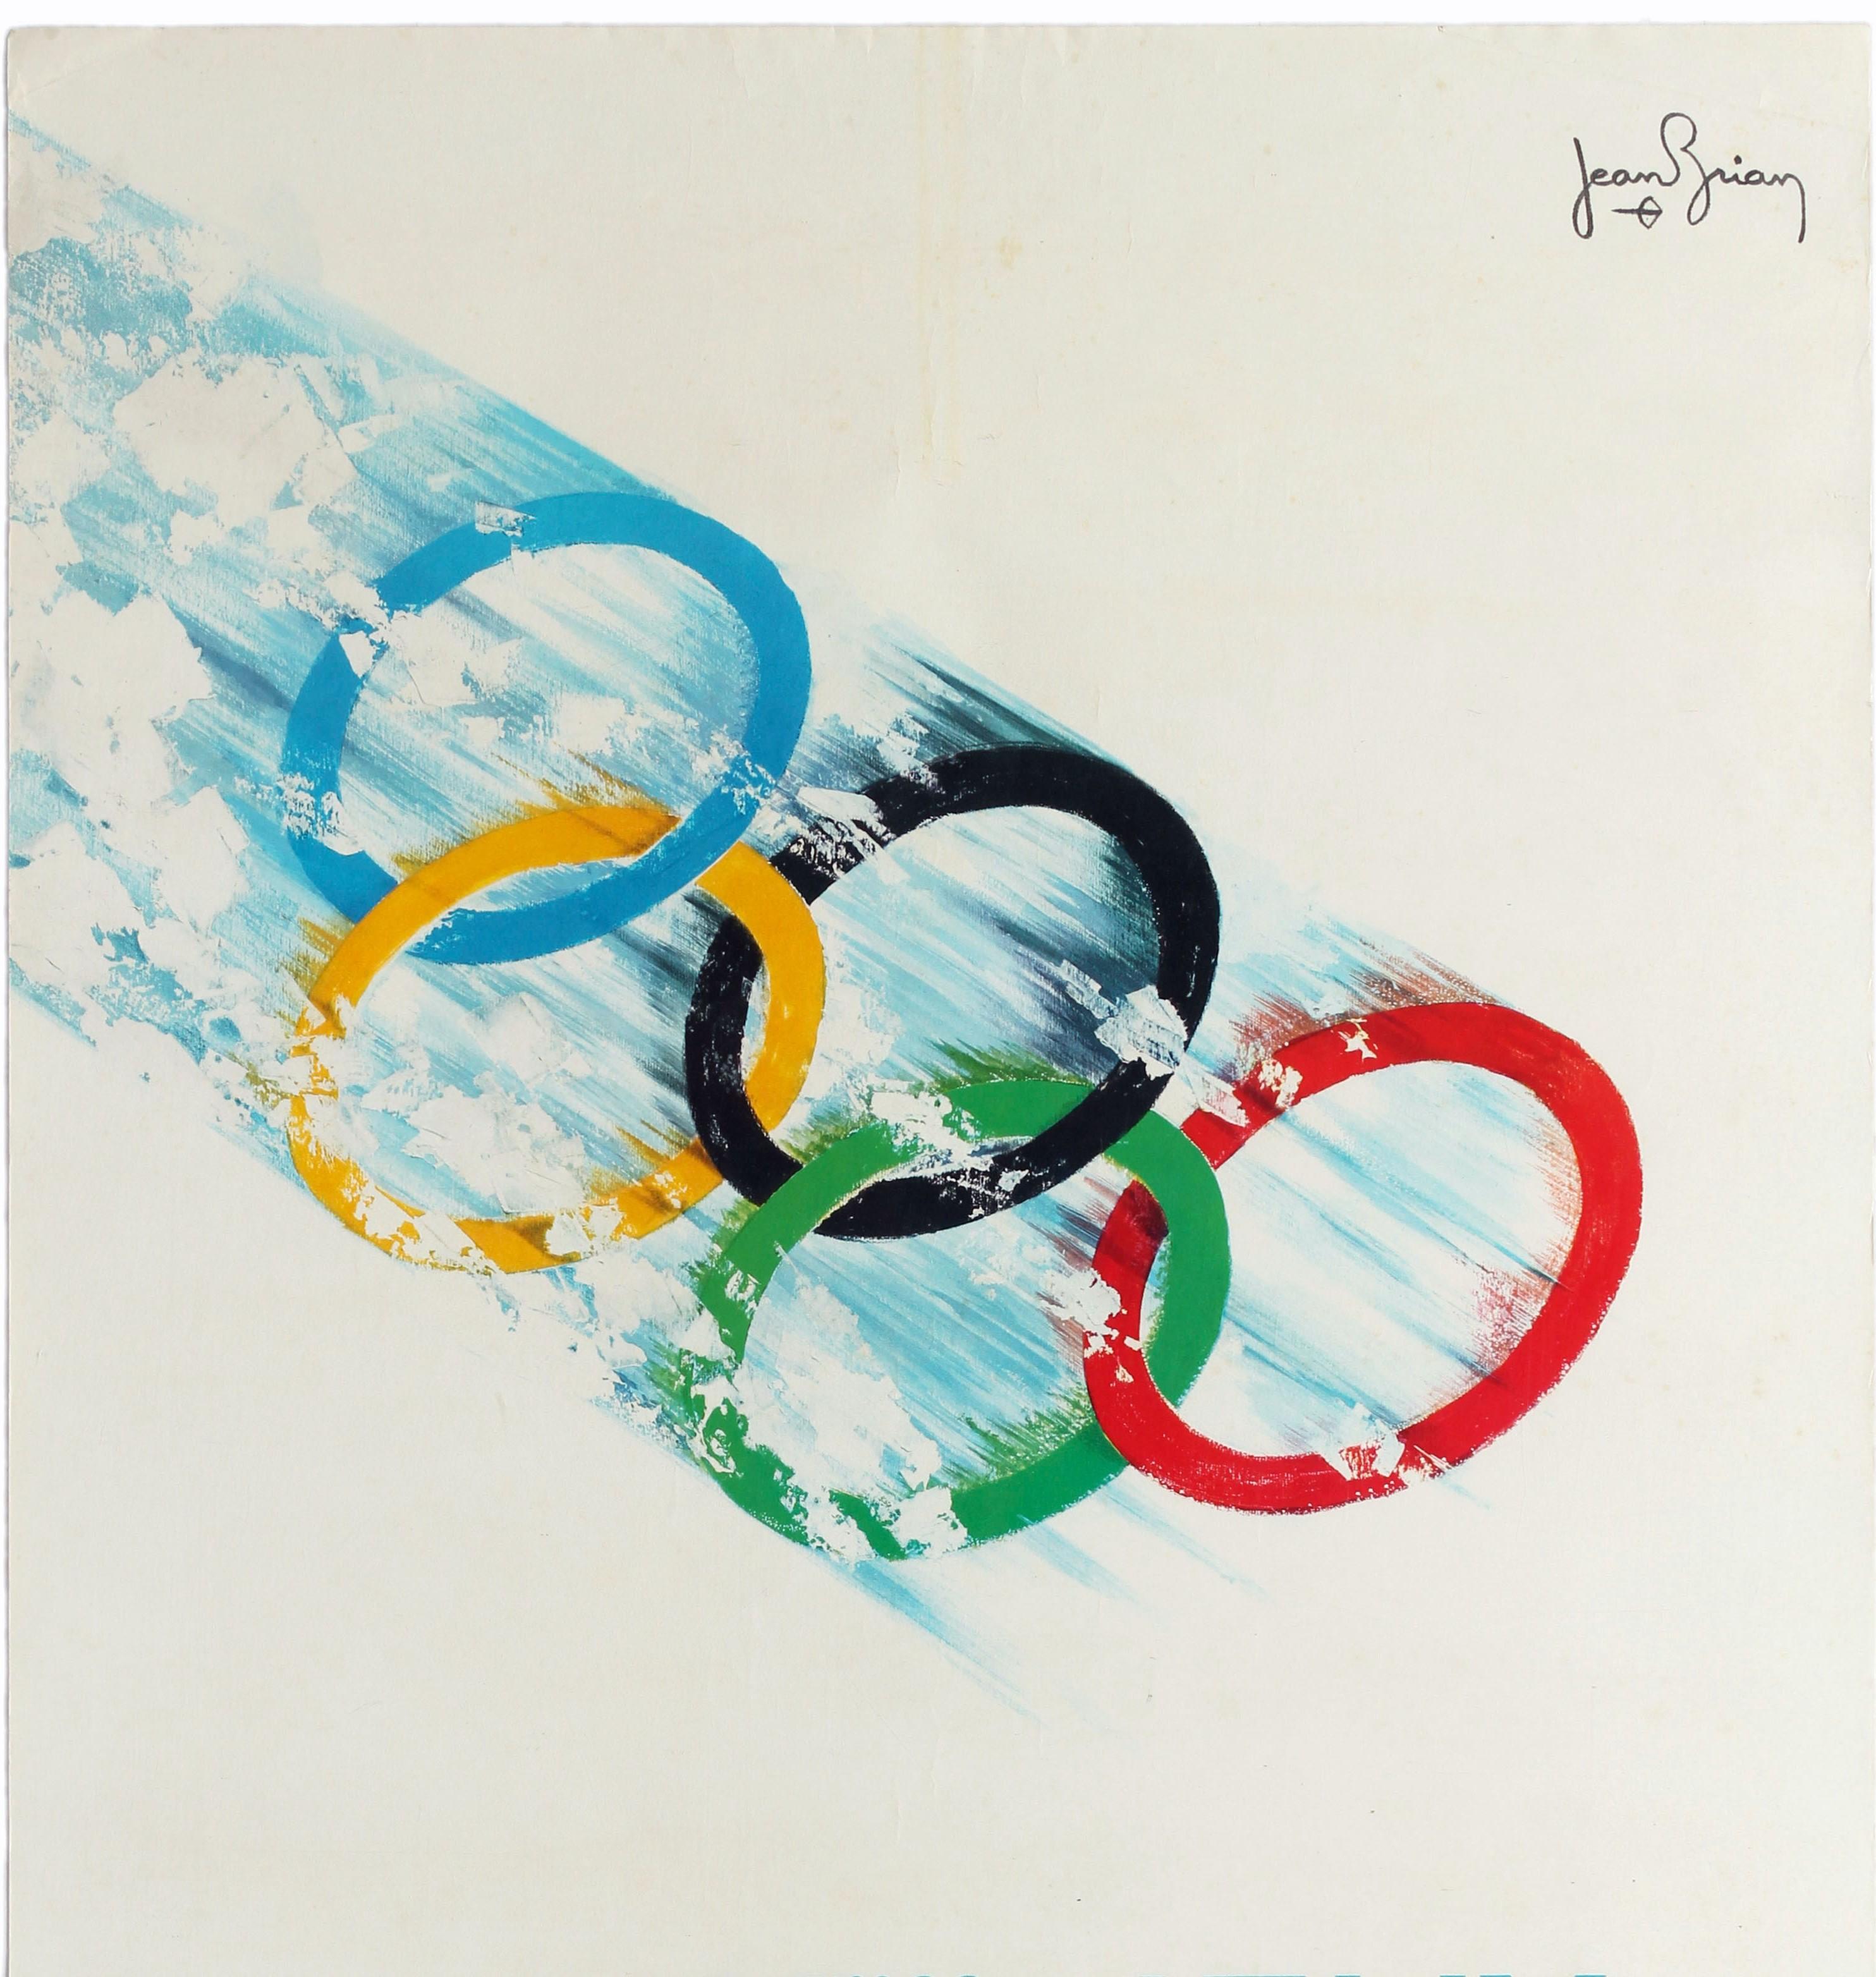 Original vintage Olympics sport poster for the 1968 Winter Olympic Games / Jeux Olympiques D’Hiver held in Grenoble France from 6-18 February 1968. Great design by Jean Brian (1910-1990) depicting the multicoloured Olympic rings racing through the